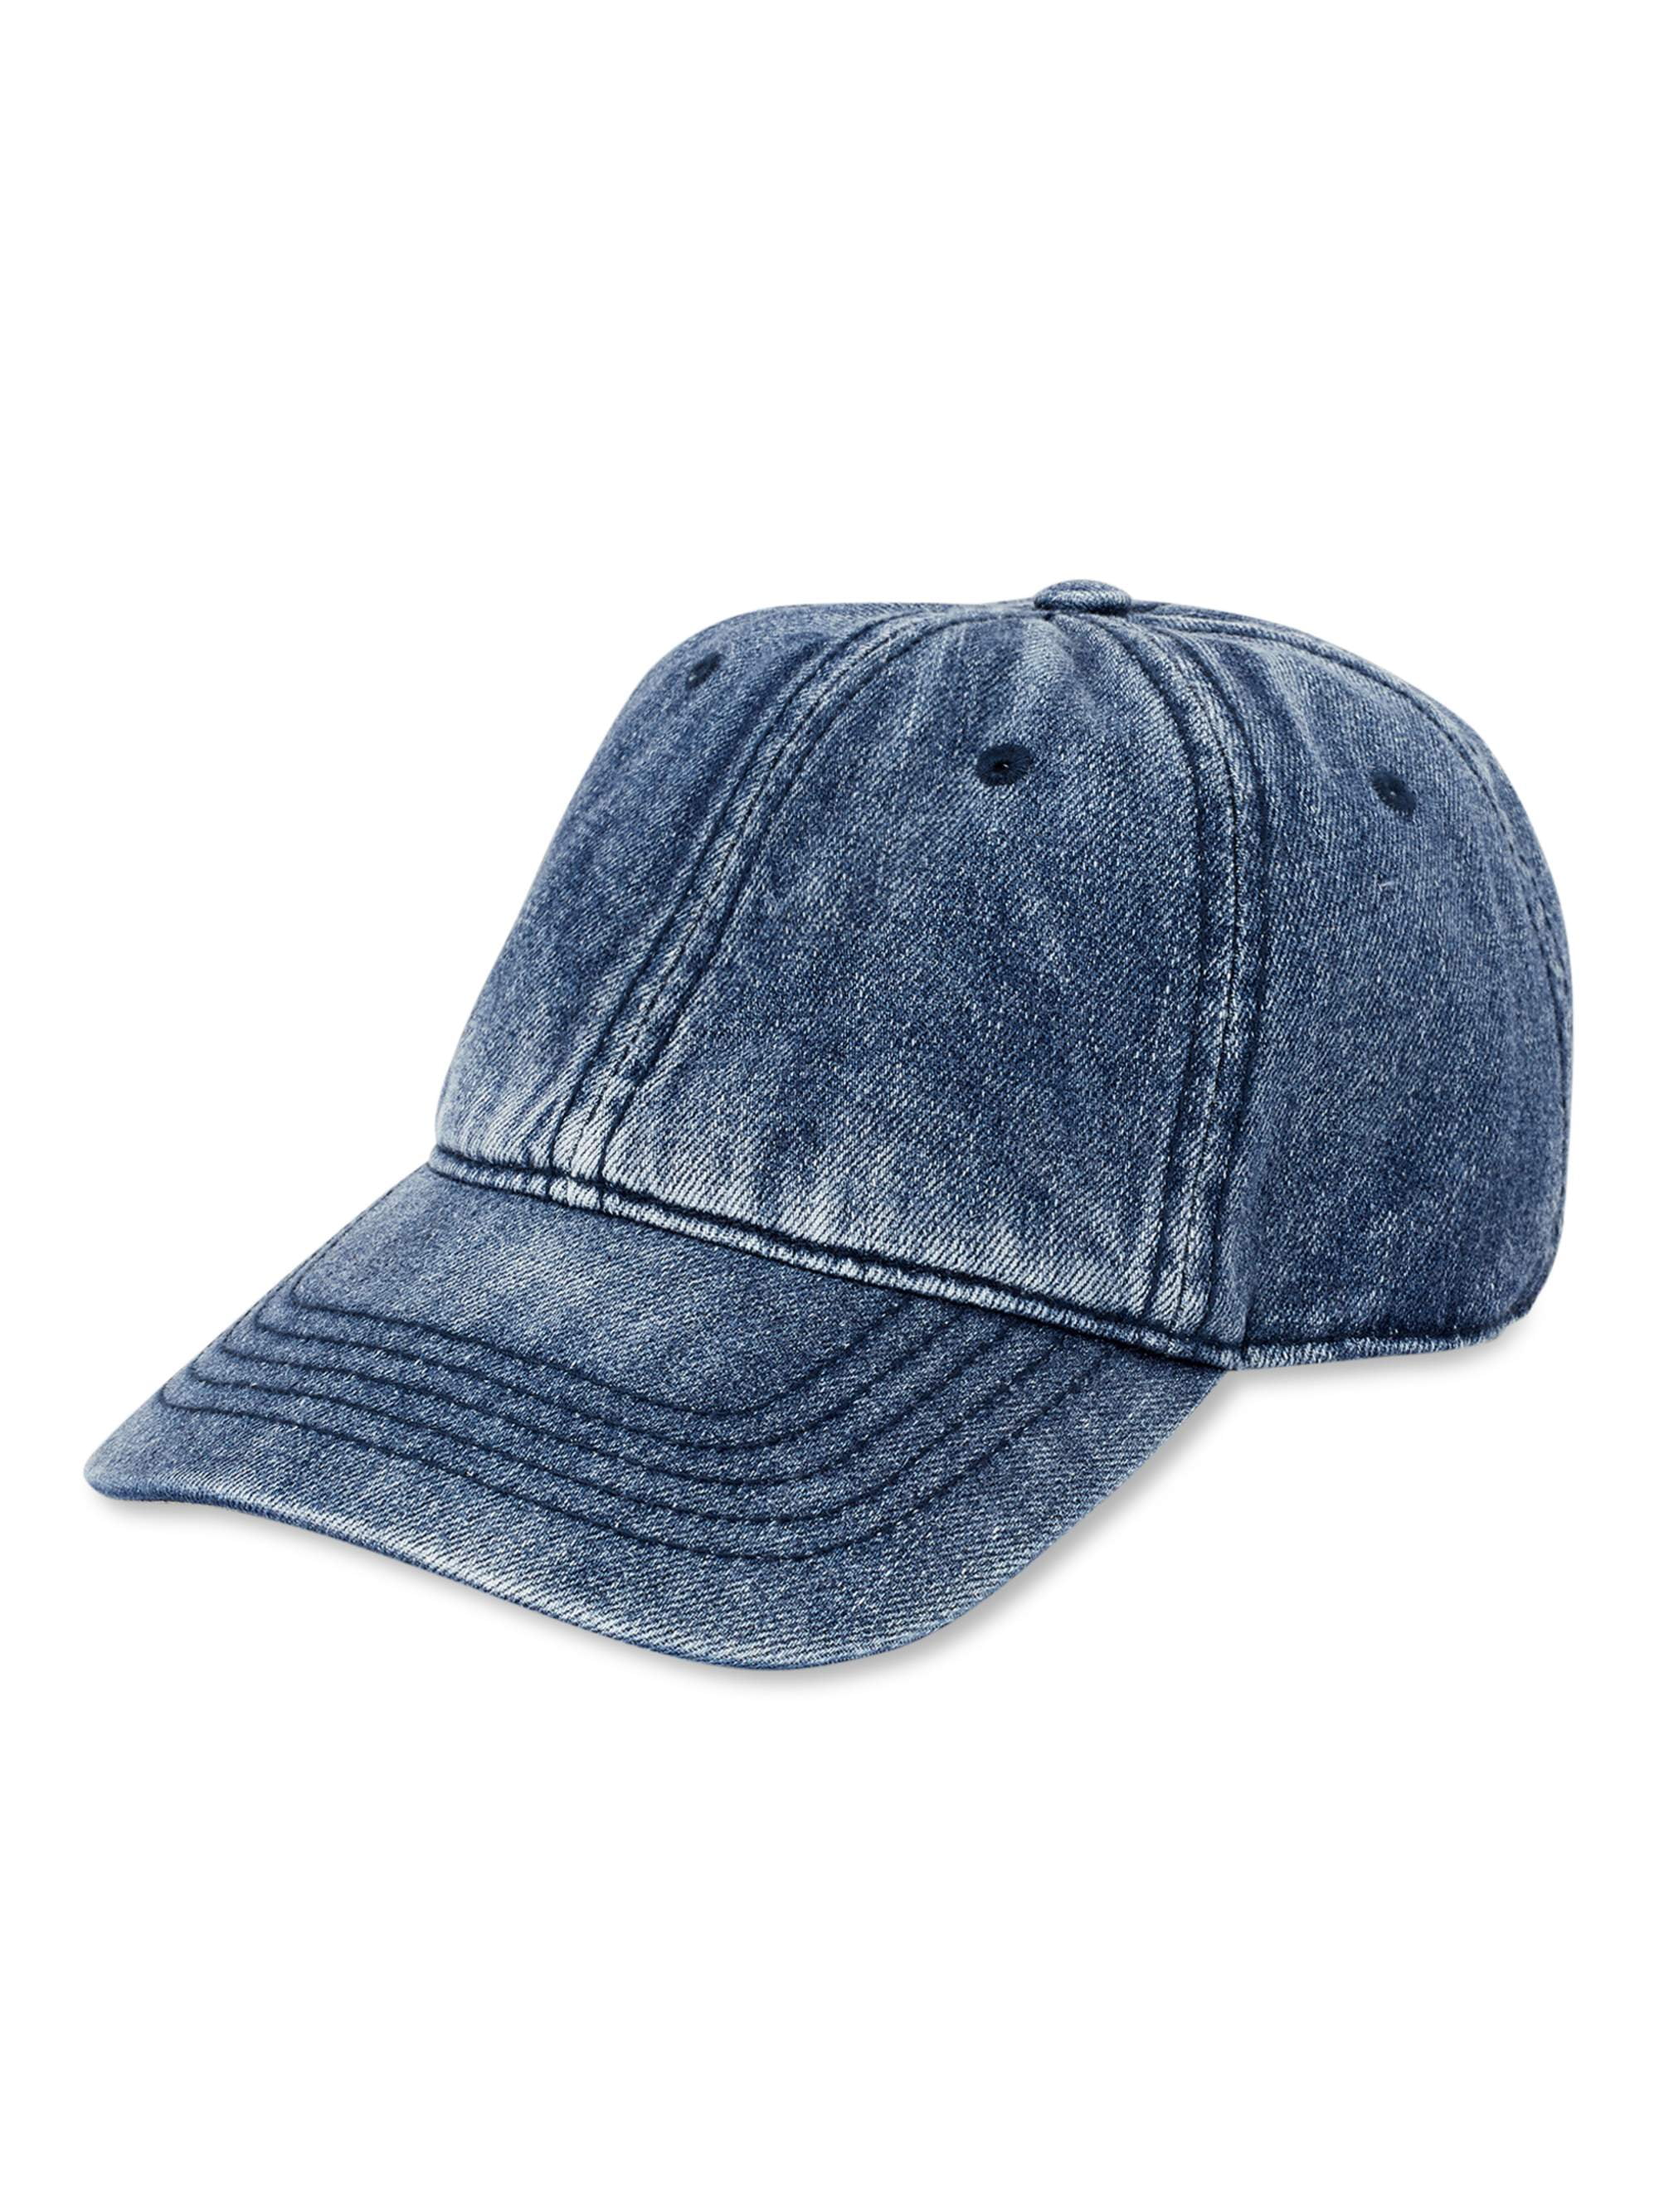 Time and Tru Women\'s Washed Cotton Twill Baseball Hat, Blue Denim